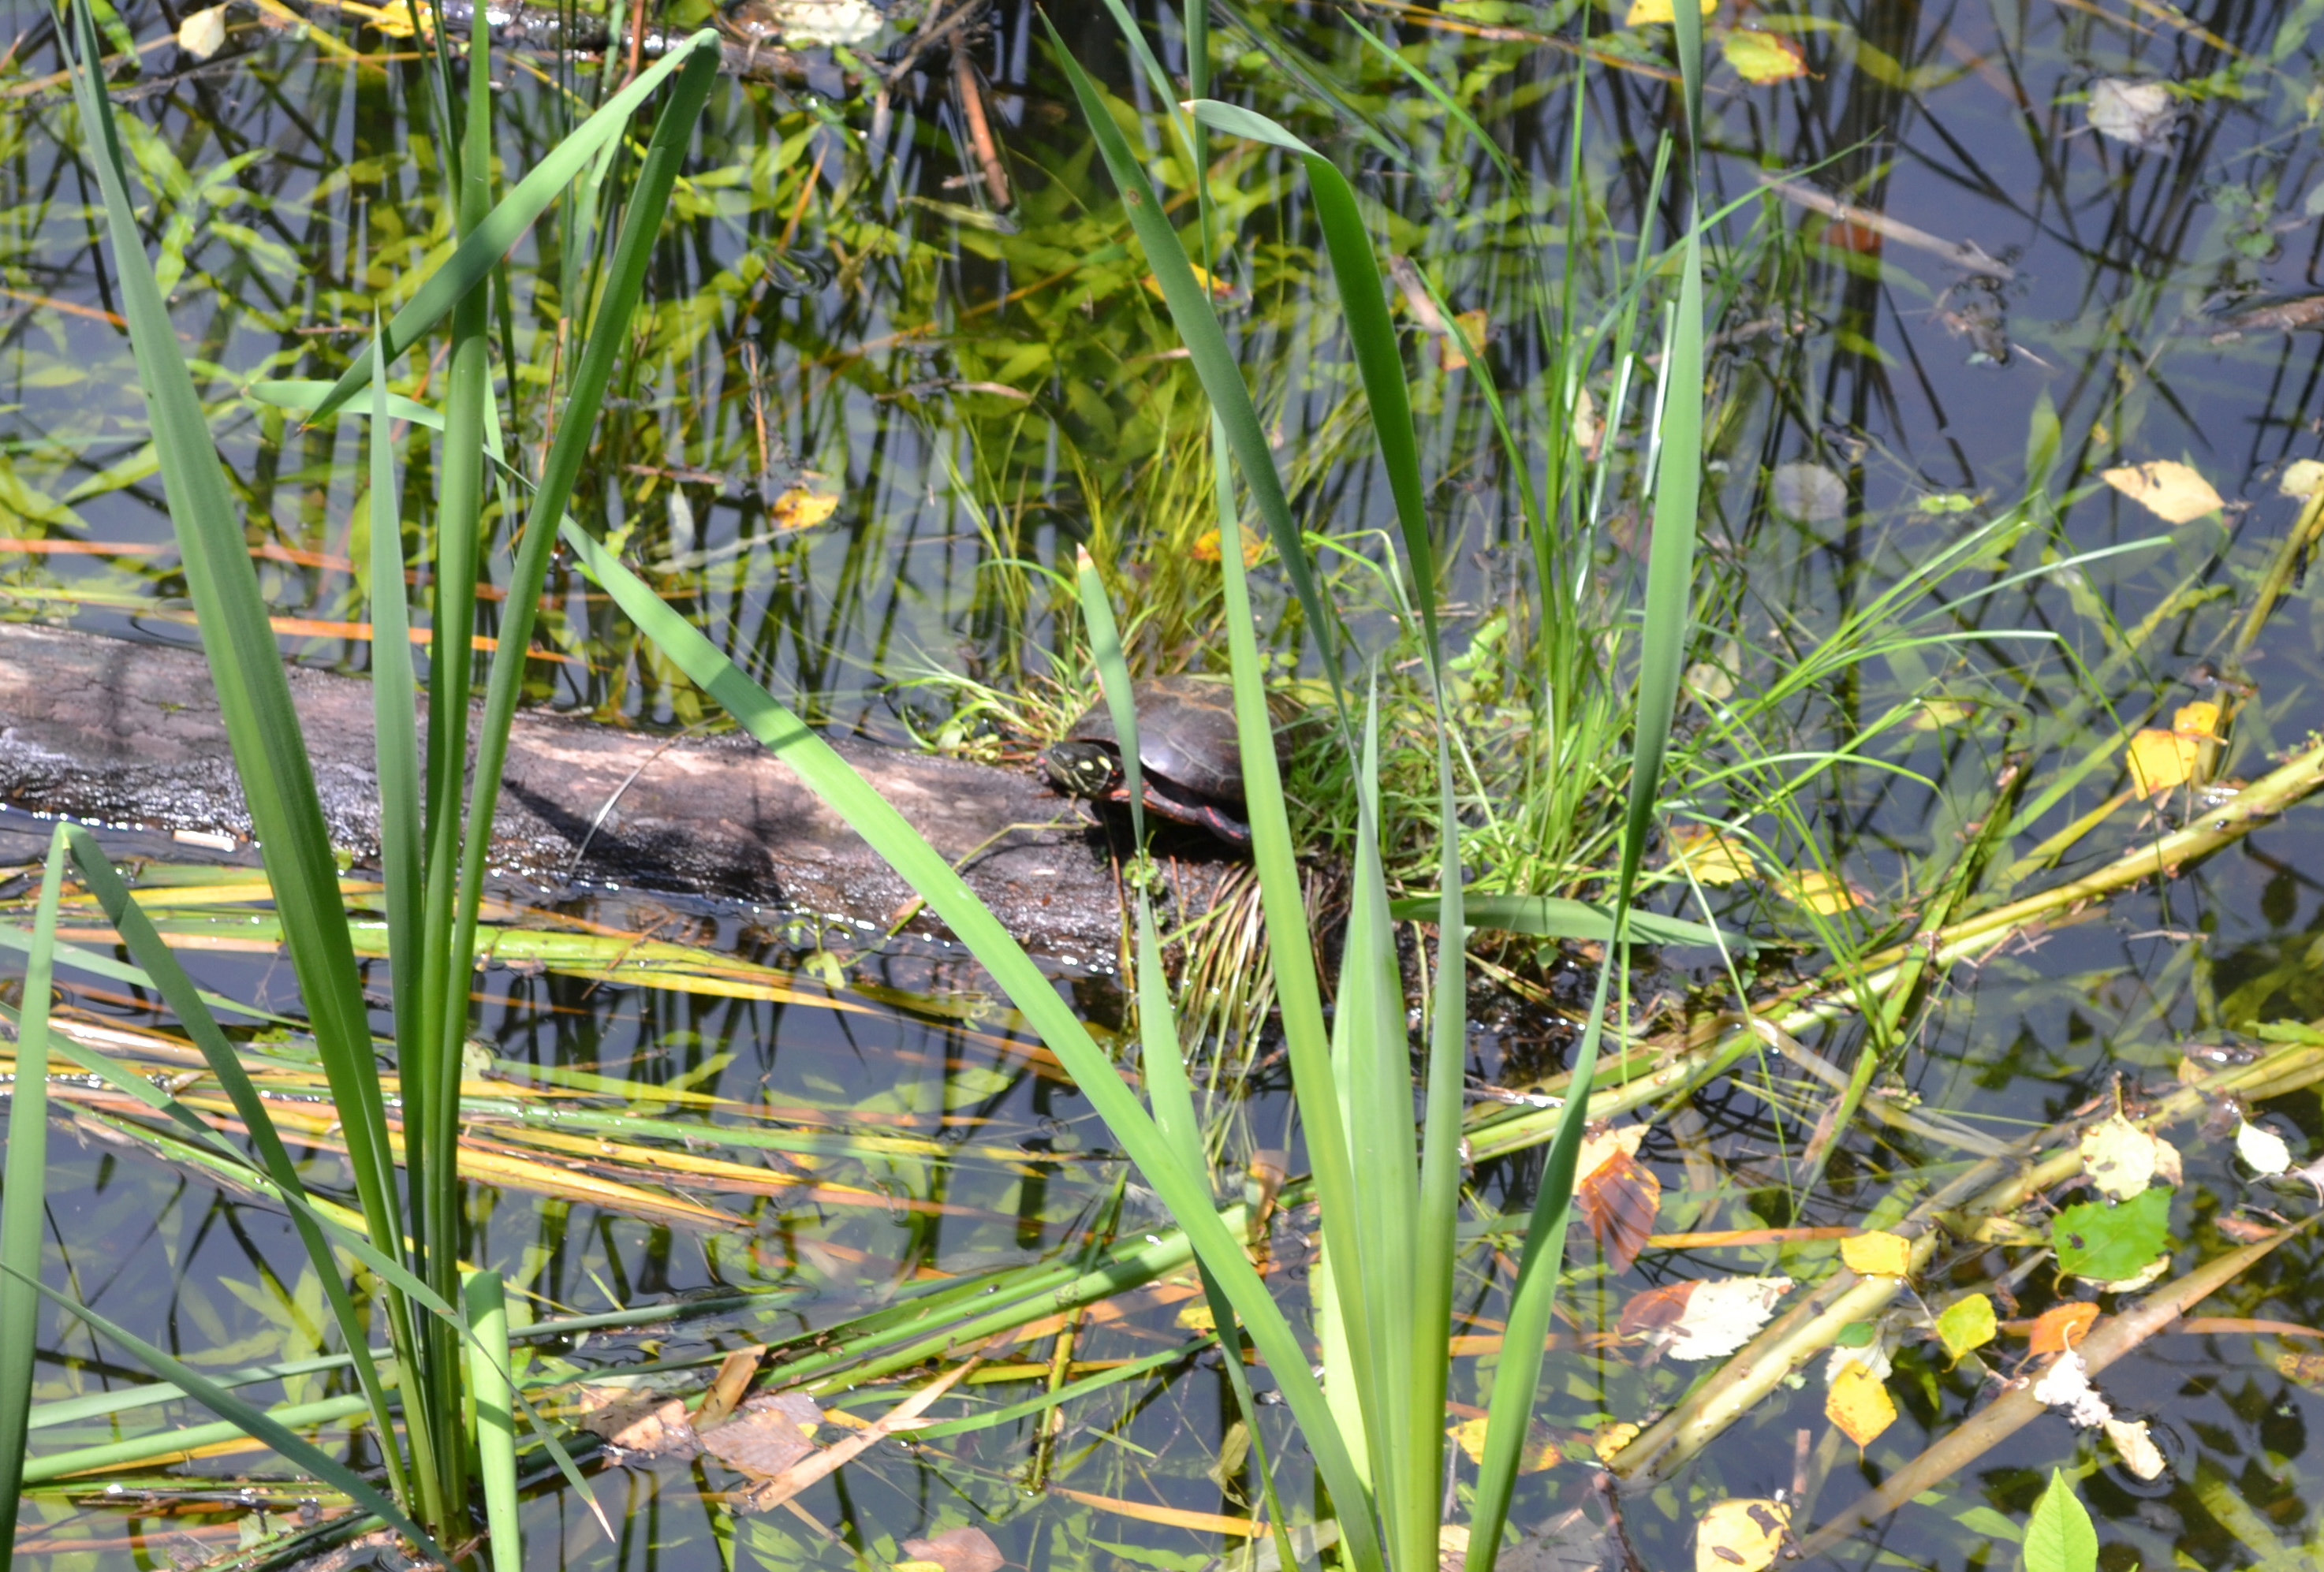 This turtle is one of the many critters that can be spotted from the Cusano Environmental Education Center